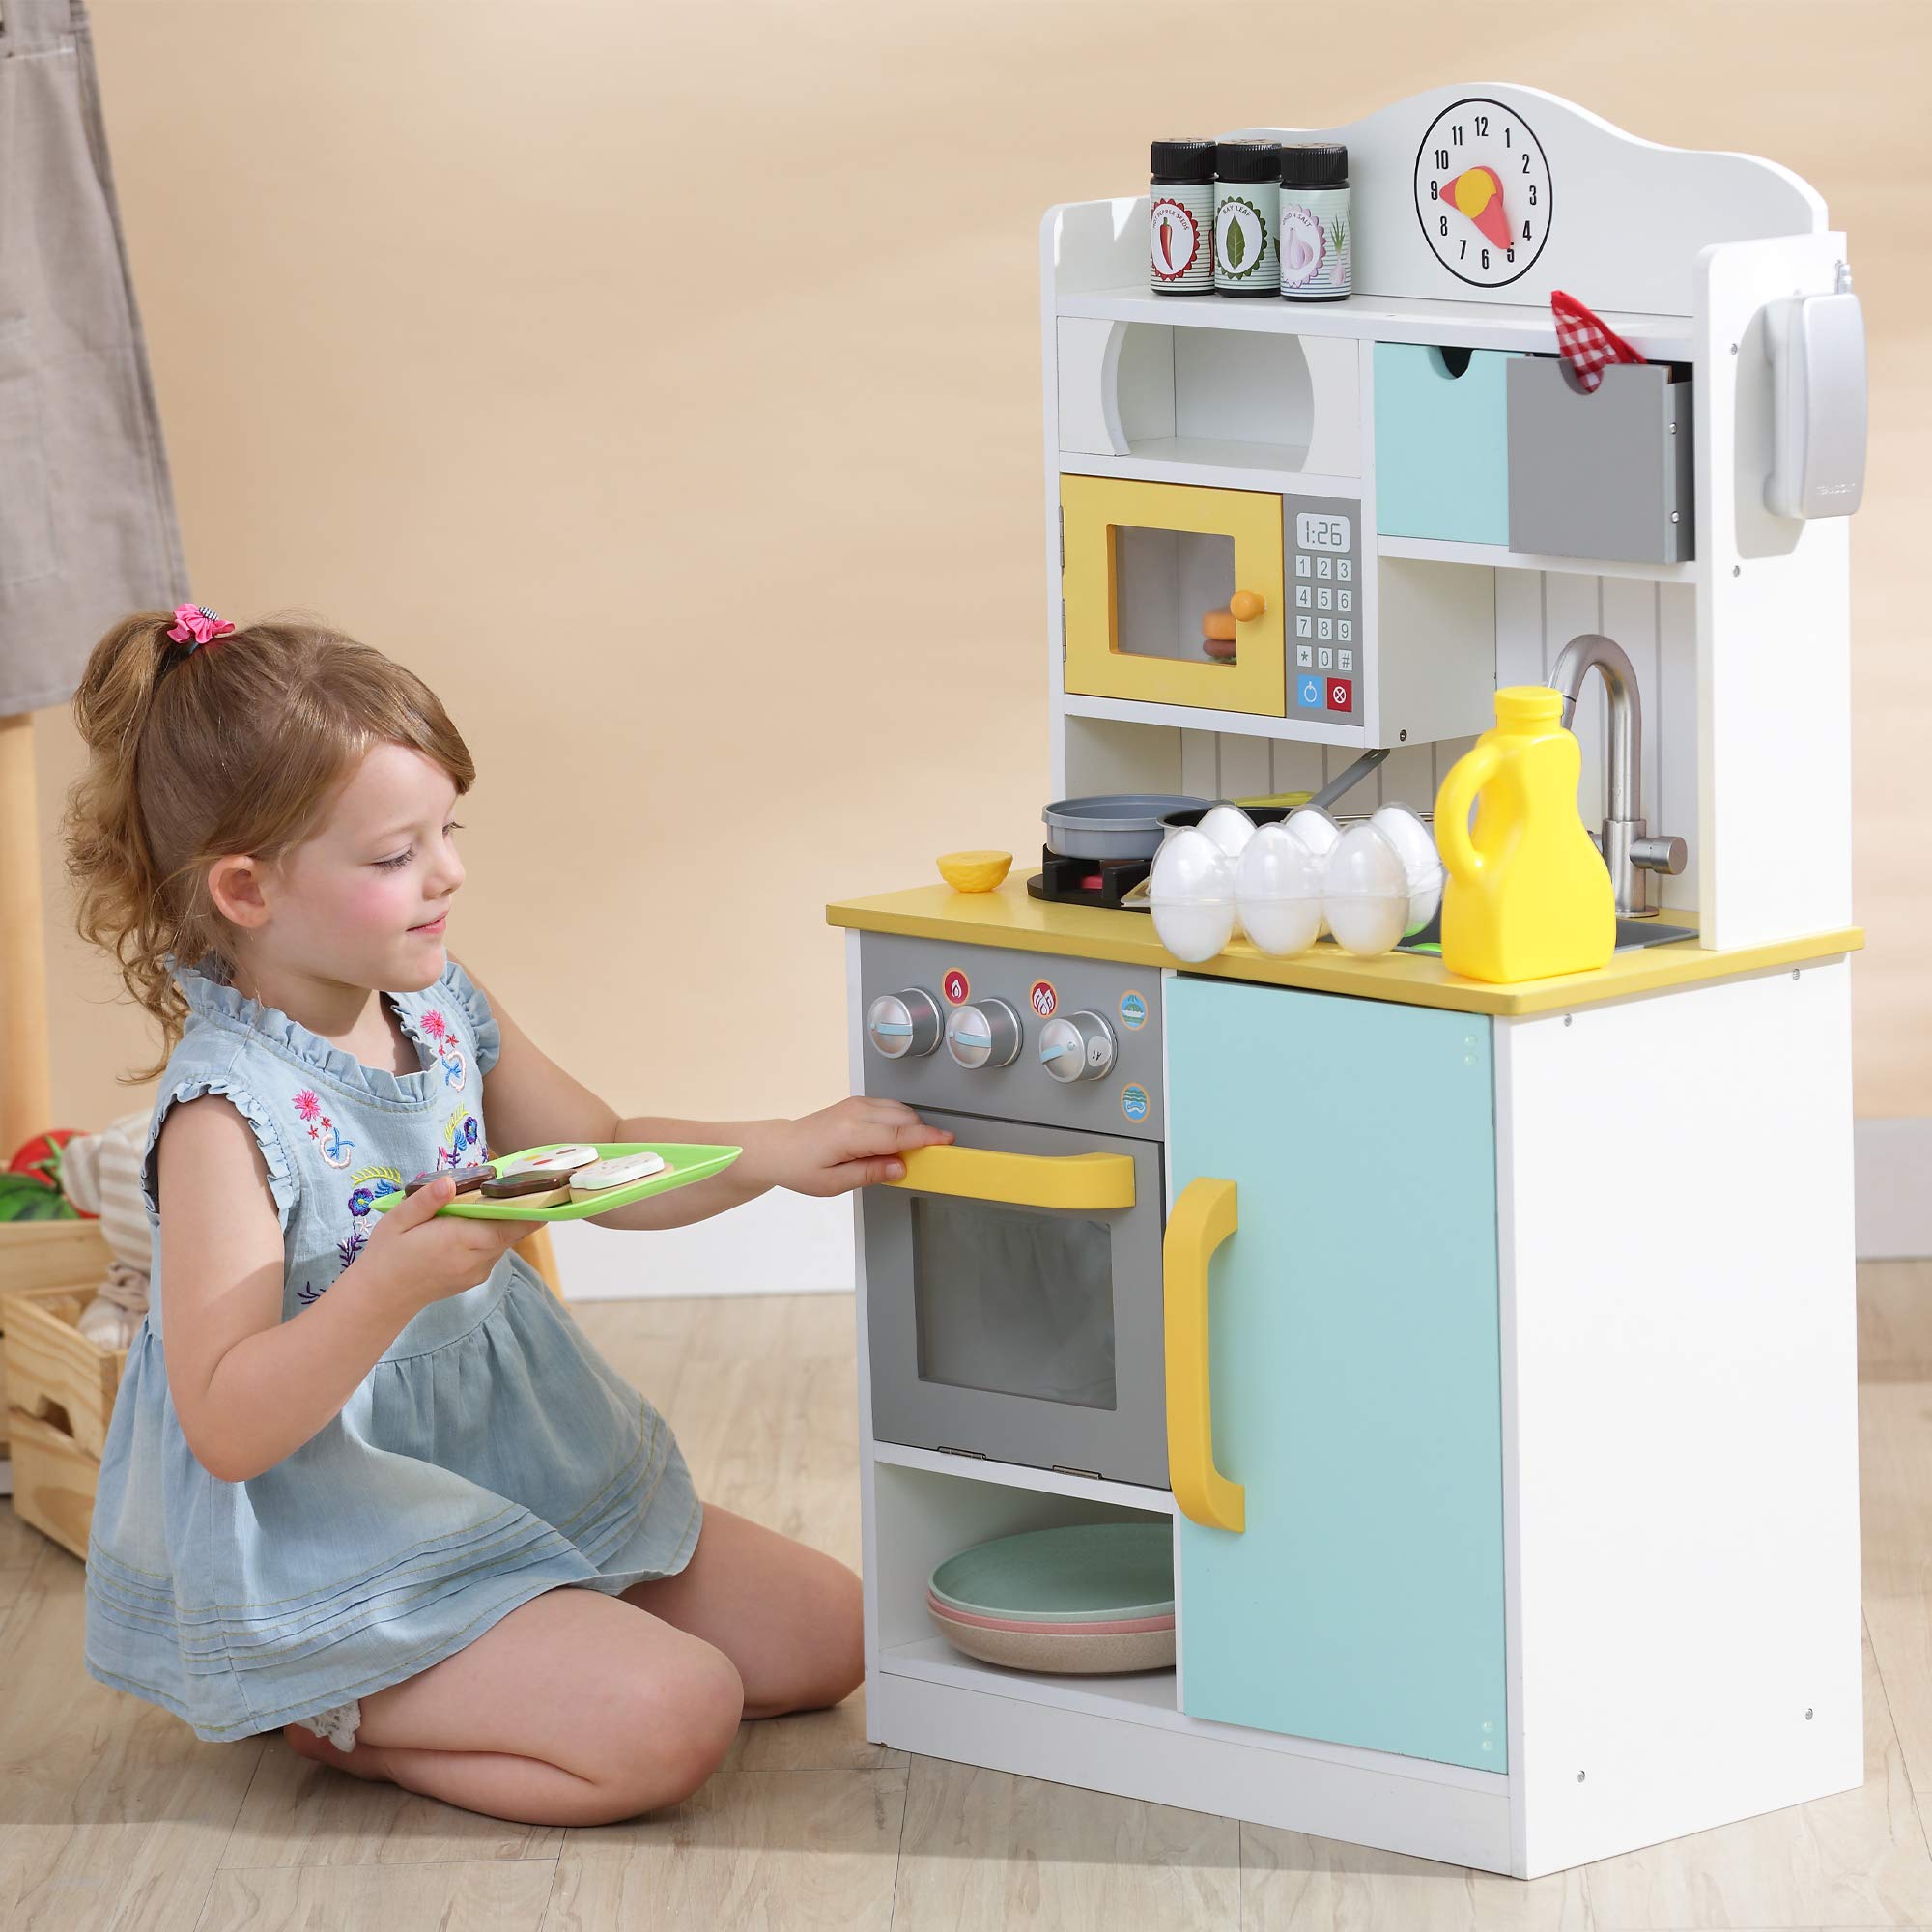 Teamson Kids Little Chef Florence Classic Interactive Wooden Play Kitchen with Accessories and Storage Space for Easy Clean Up, 